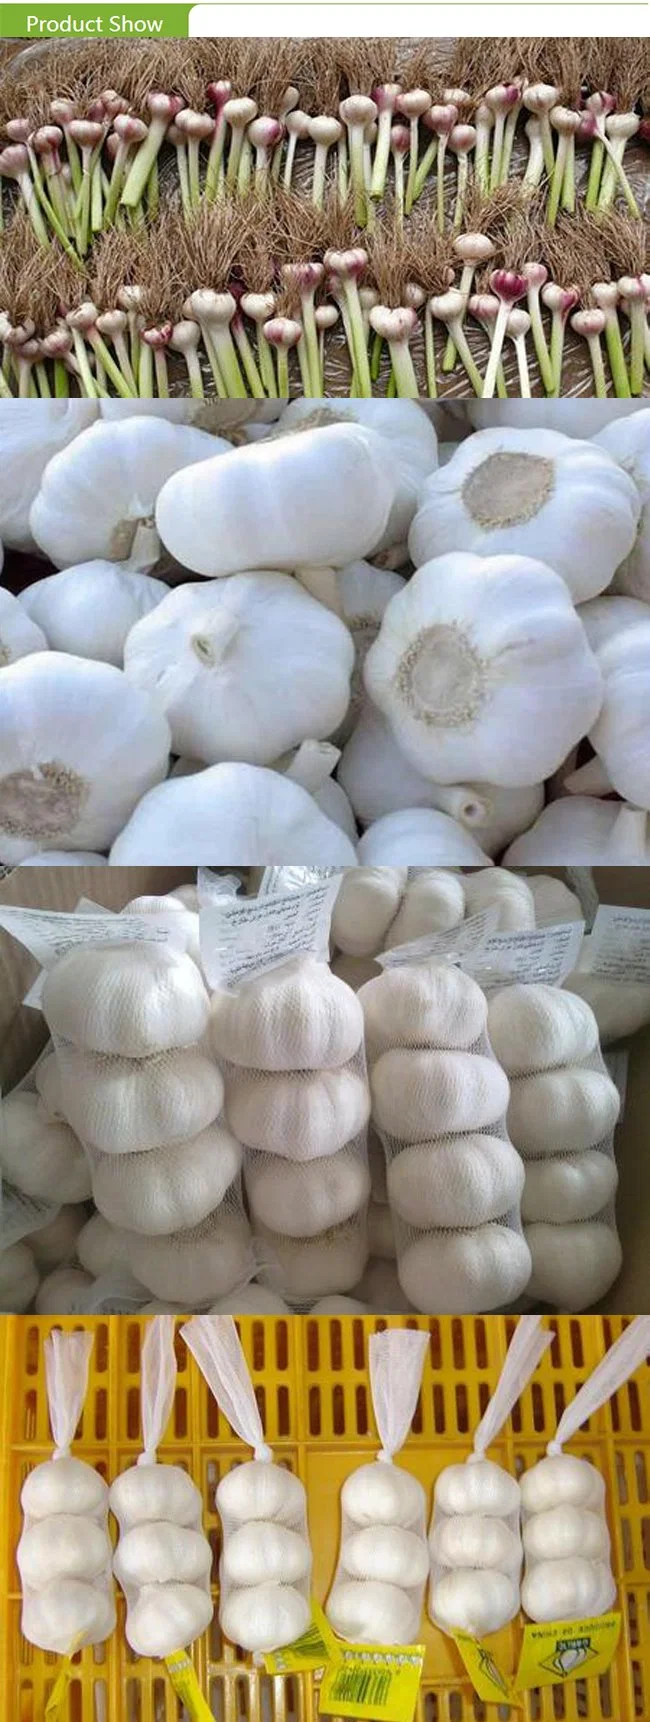 IQF Frozen Garlic Cloves with Competitive Price Brc a